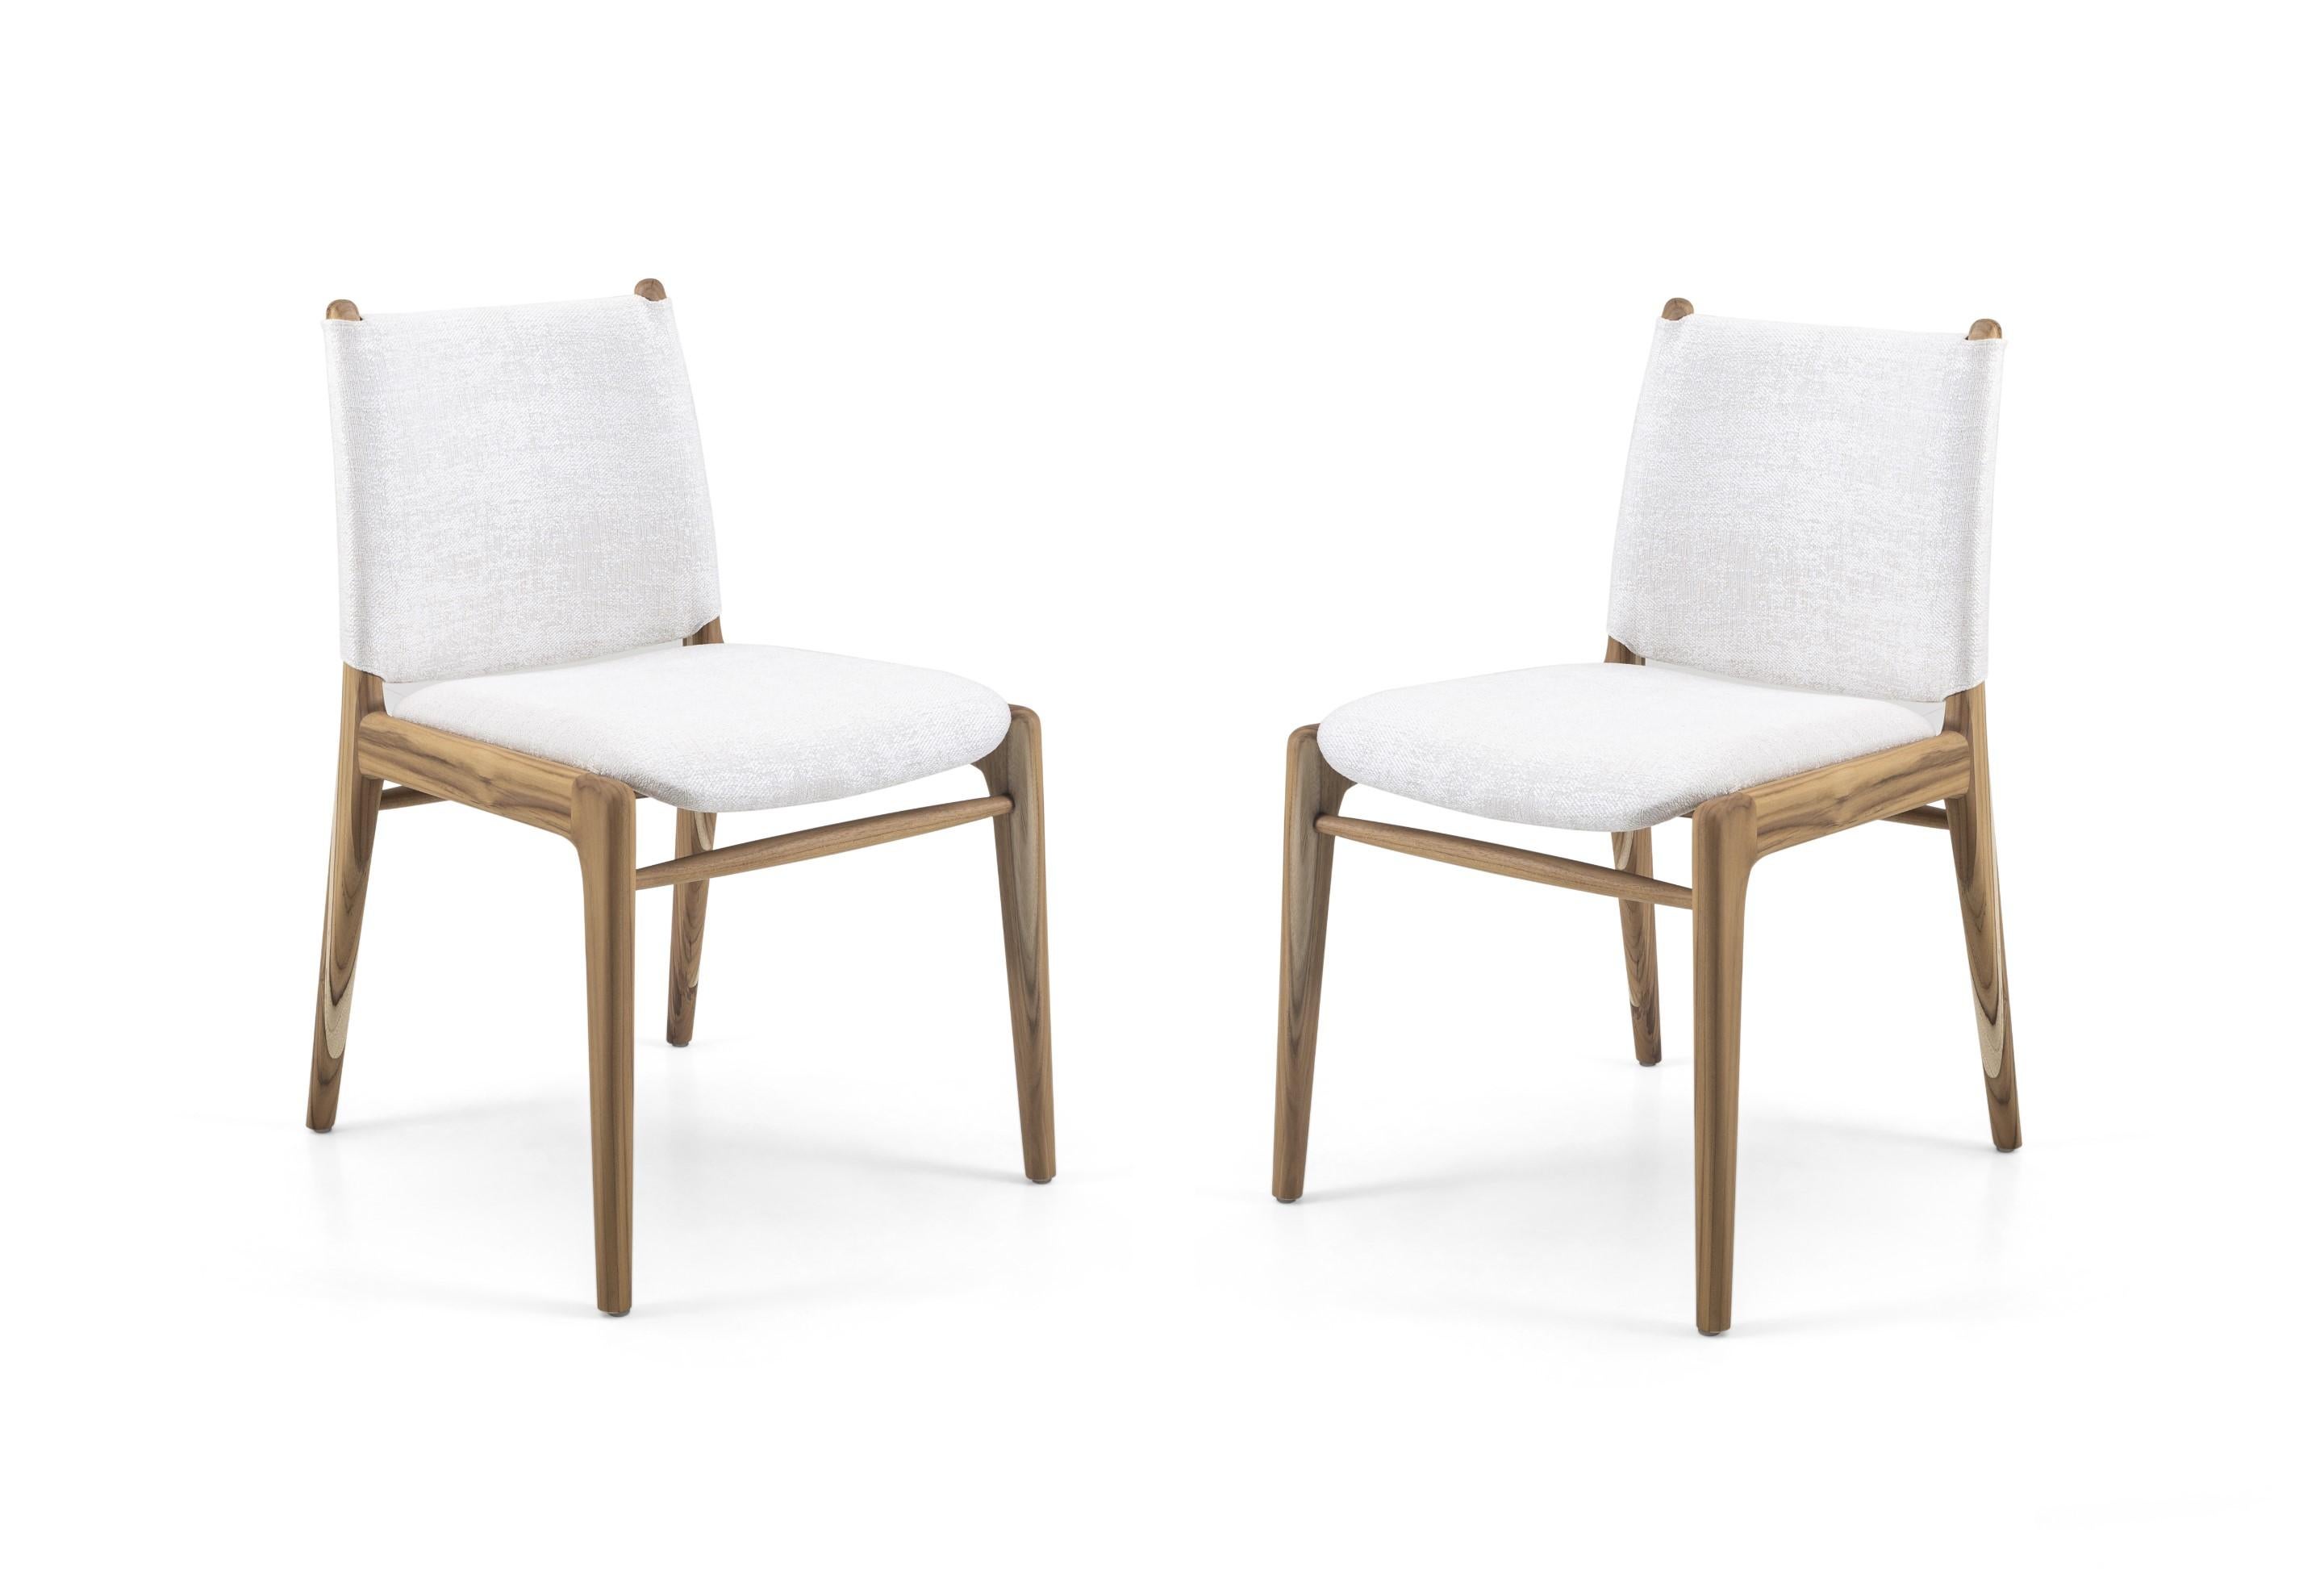 Cappio Dining Chair in Teak Wood and Light Beige Fabric, set of 2